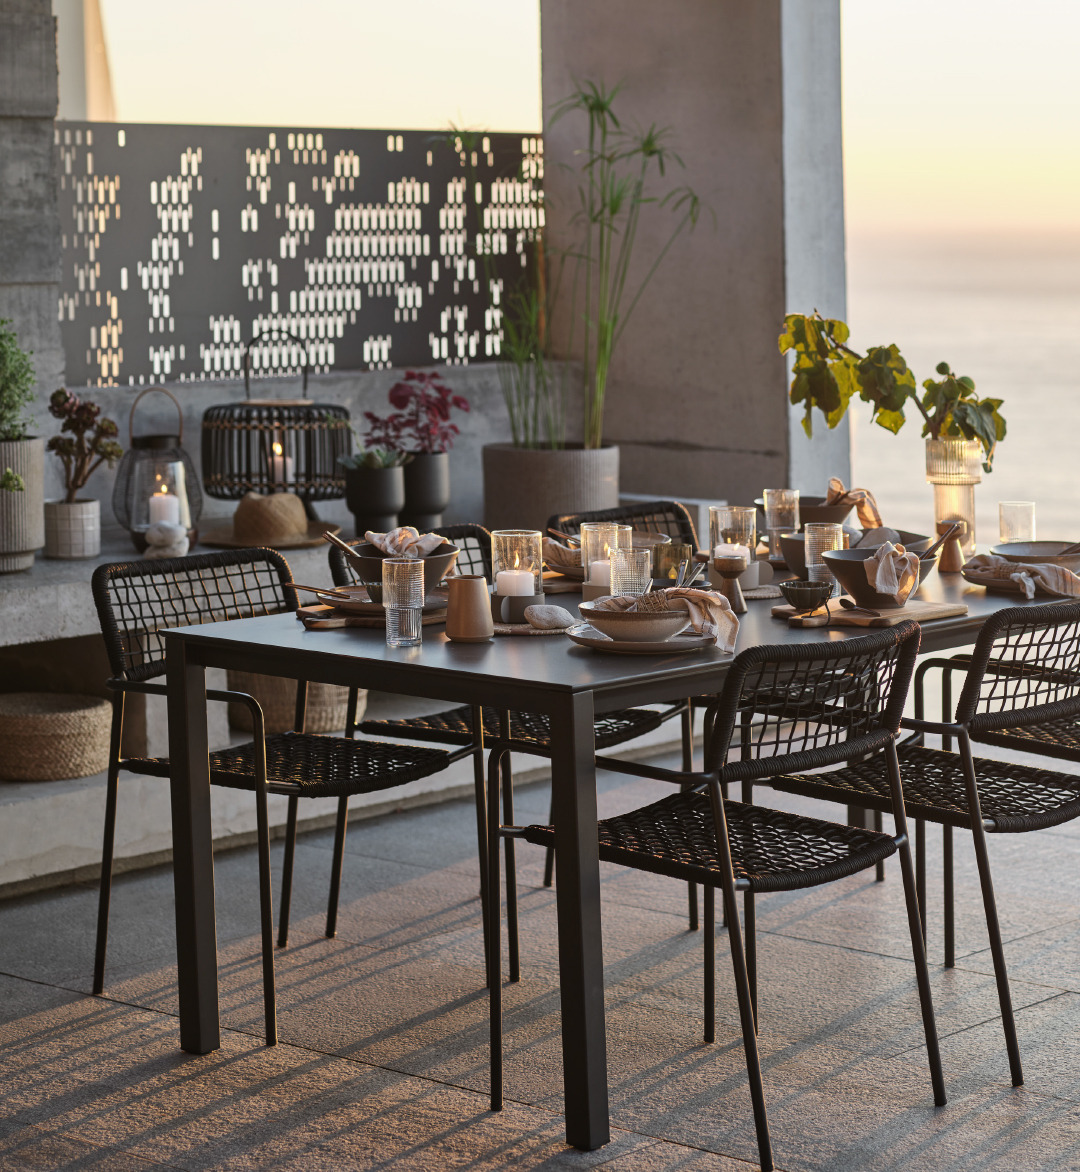 Black outdoor dining table with cutlery set